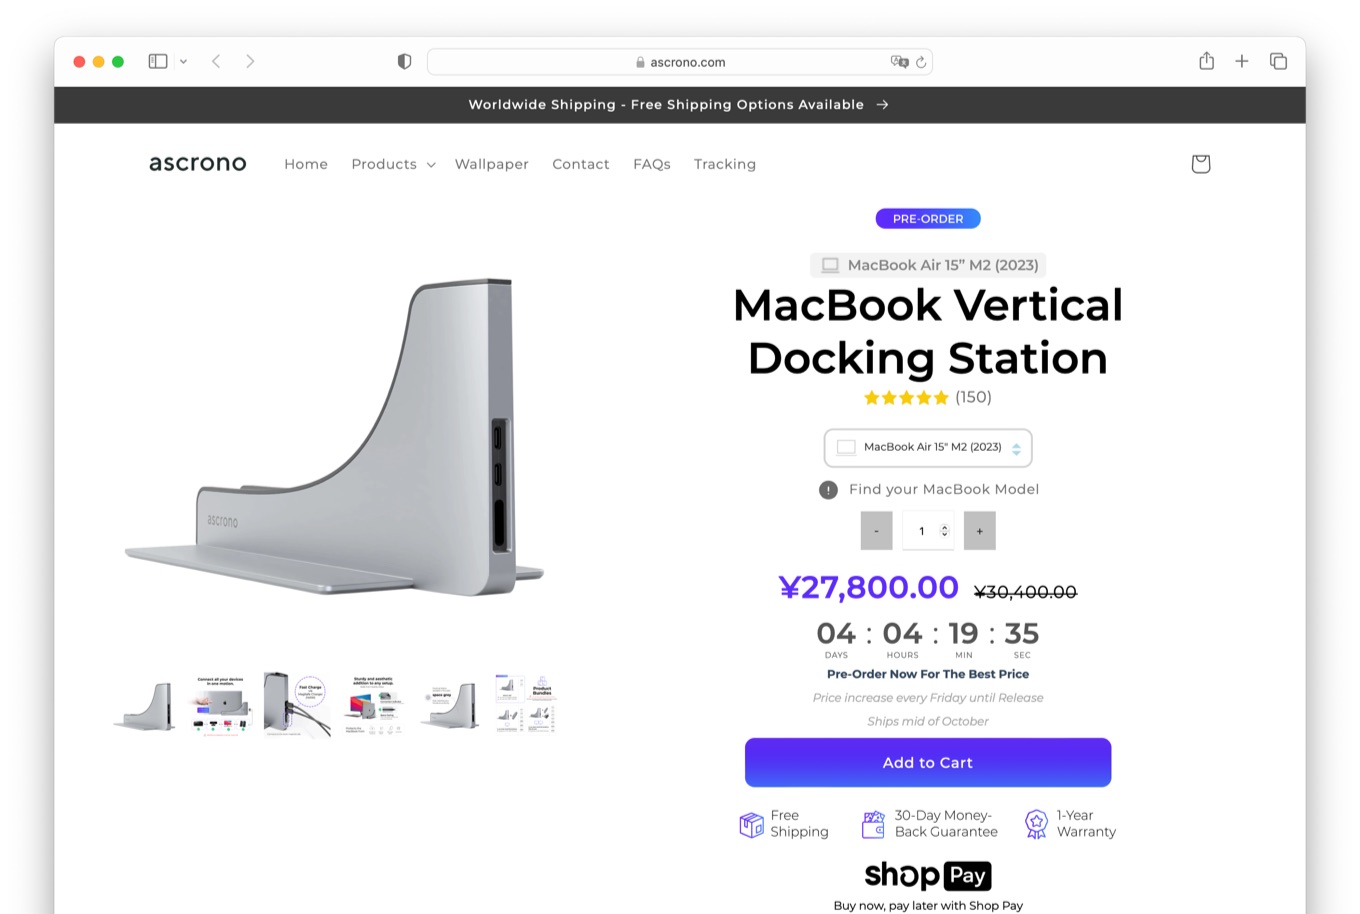 Ascrono MacBook Vertical Docking Station for MacBook Air (15インチ, M2, 2023)